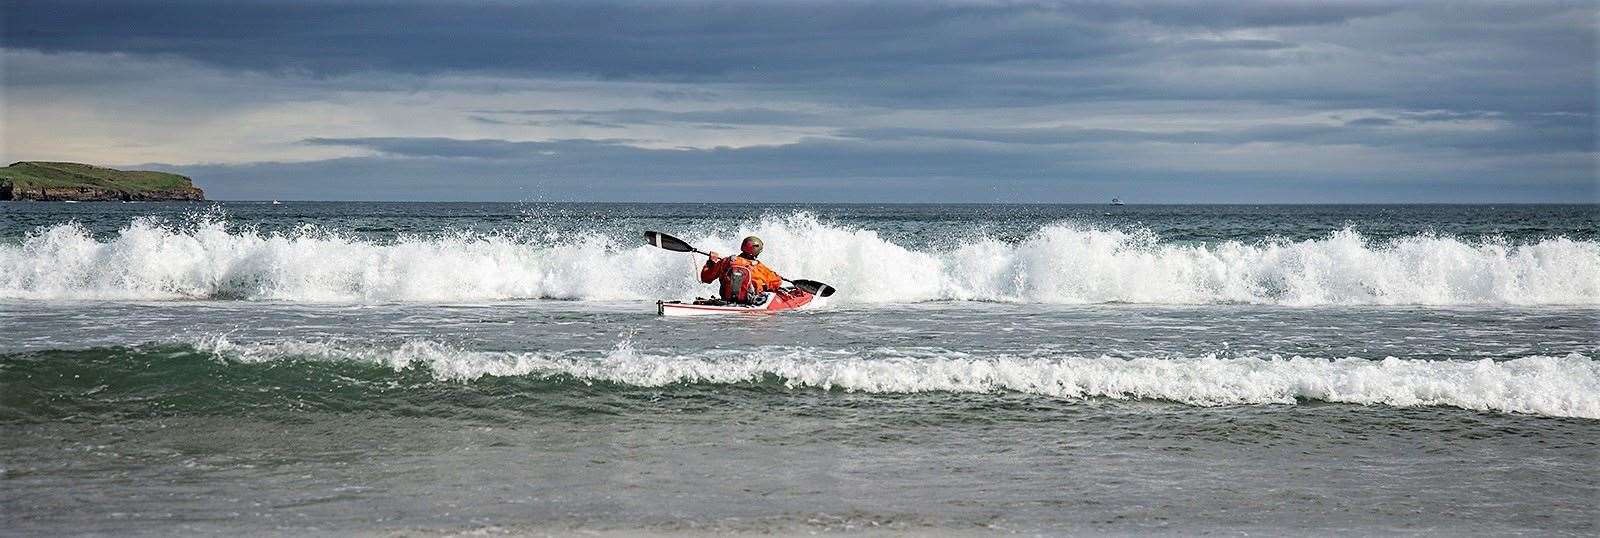 Stuart braves the waves in this panoramic picture taken at Thurso beach on Sunday. Picture: Gordon Milne